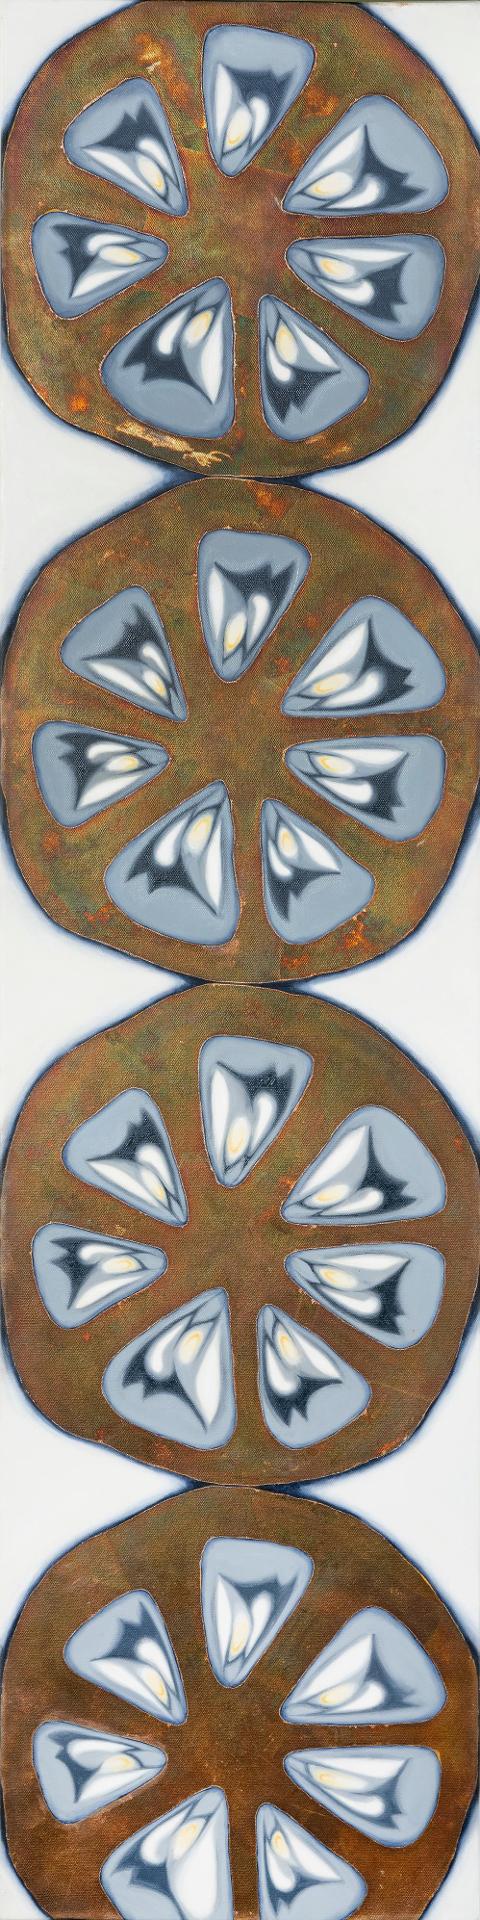 Melody Armstrong (1965) - Cross Section Pearl Reflection